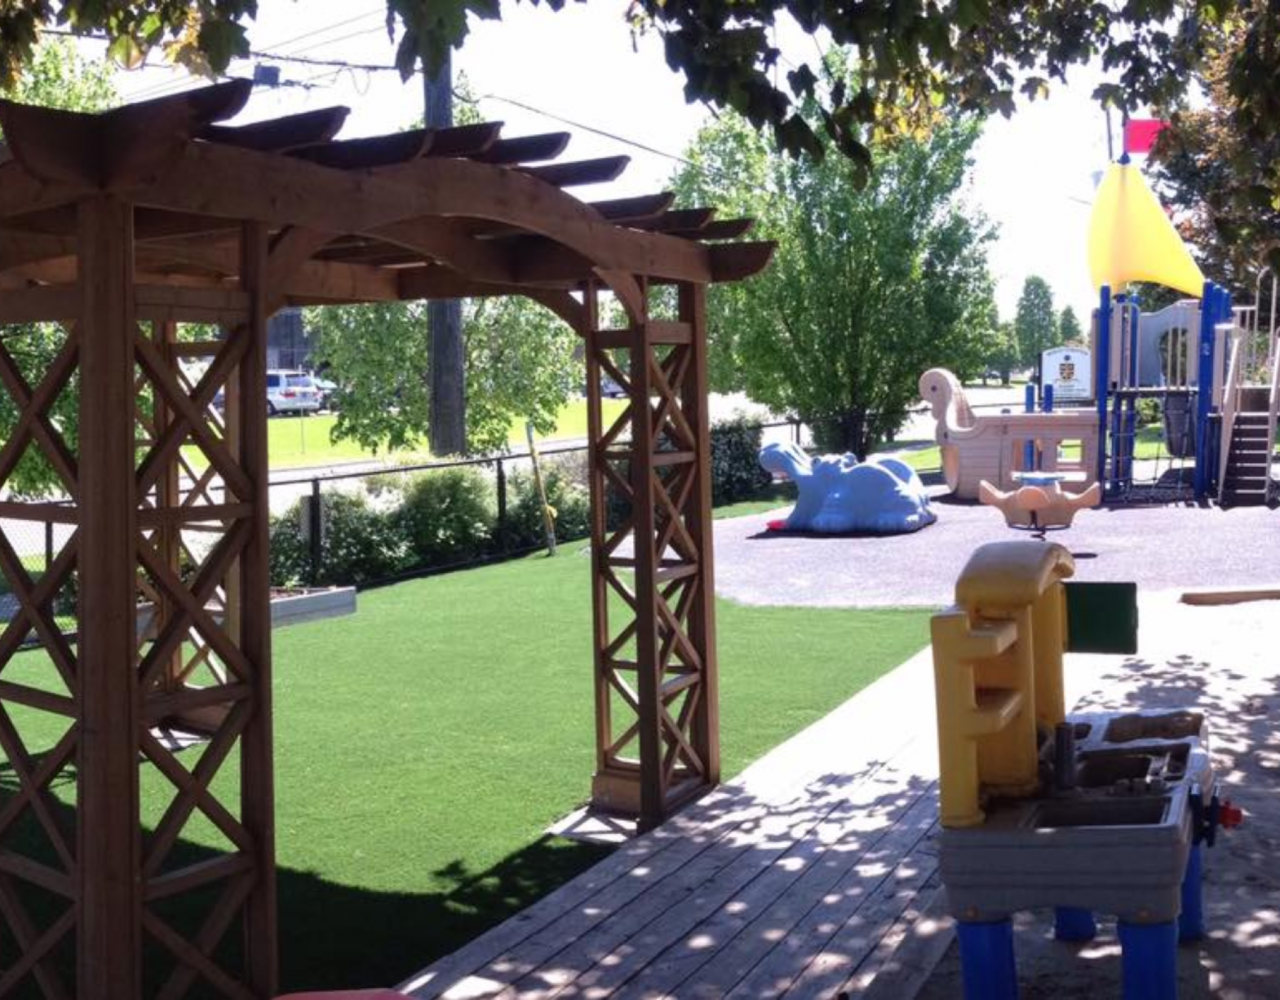 Oshawa daycare with artificial grass providing clean soft surface for kids playing